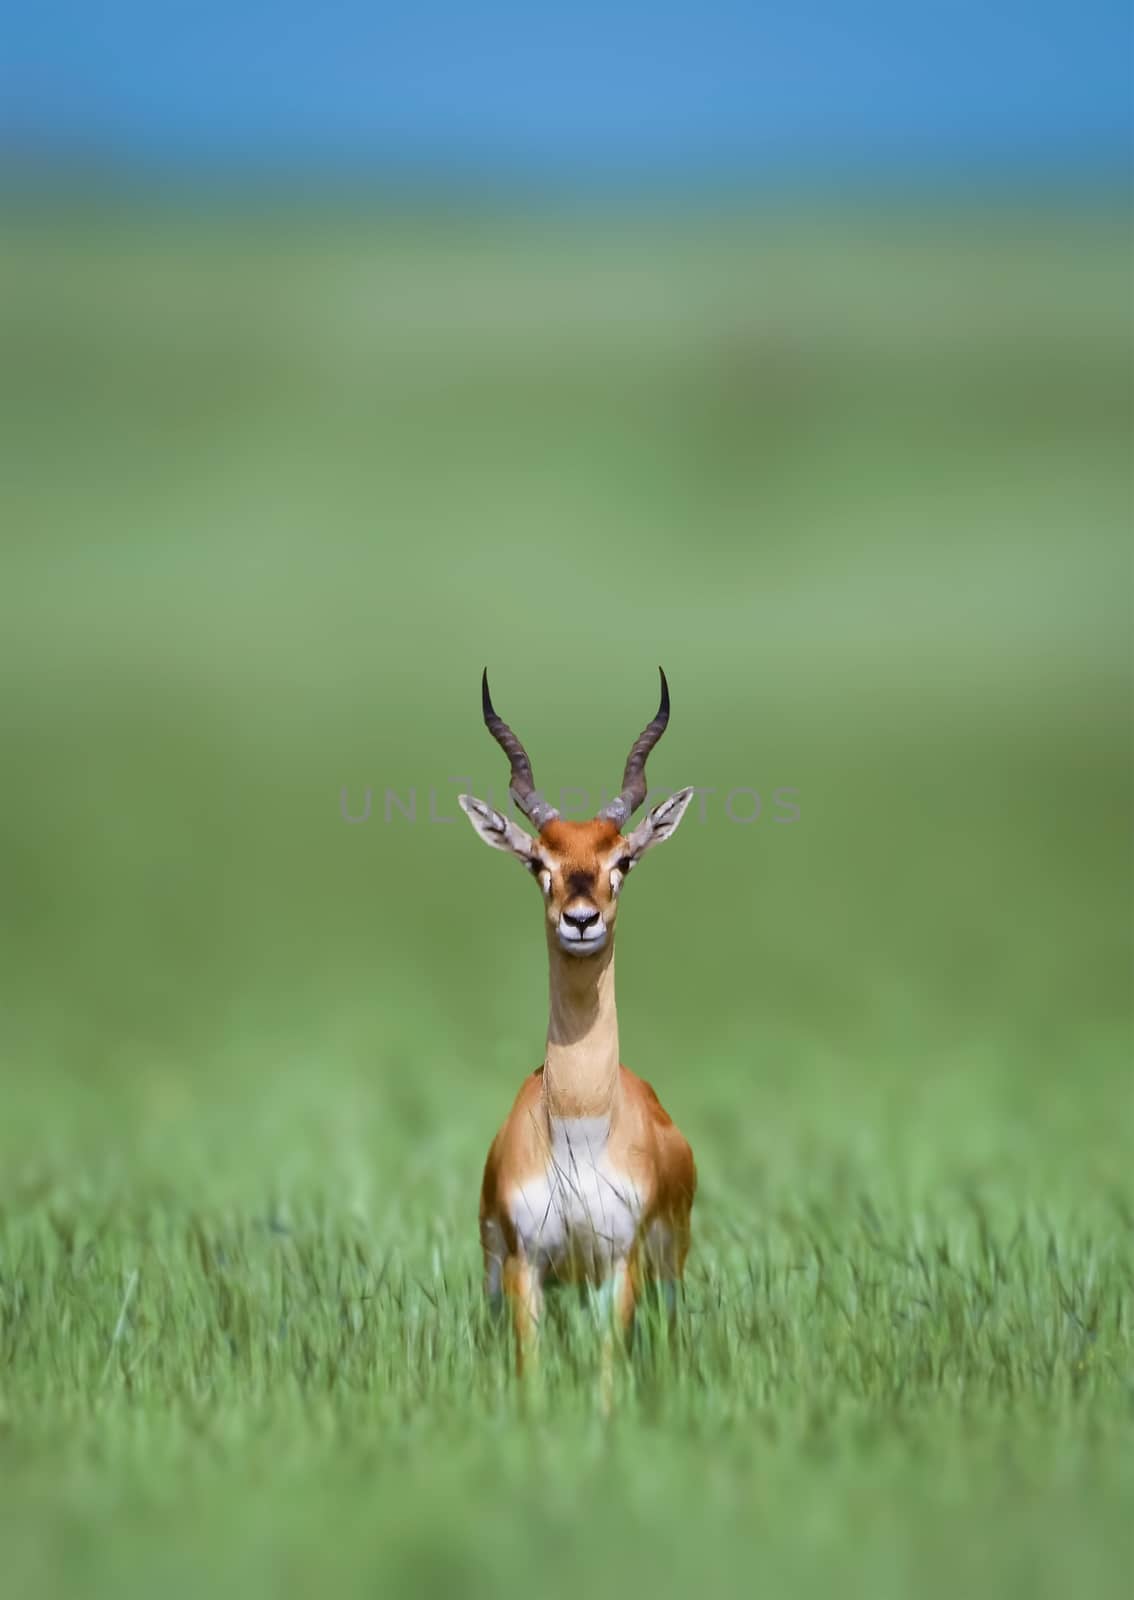 The blackbuck, also known as the Indian antelope, is an antelope found in India, Nepal, and Pakistan. The blackbuck is the sole extant member of the genus Antilope.